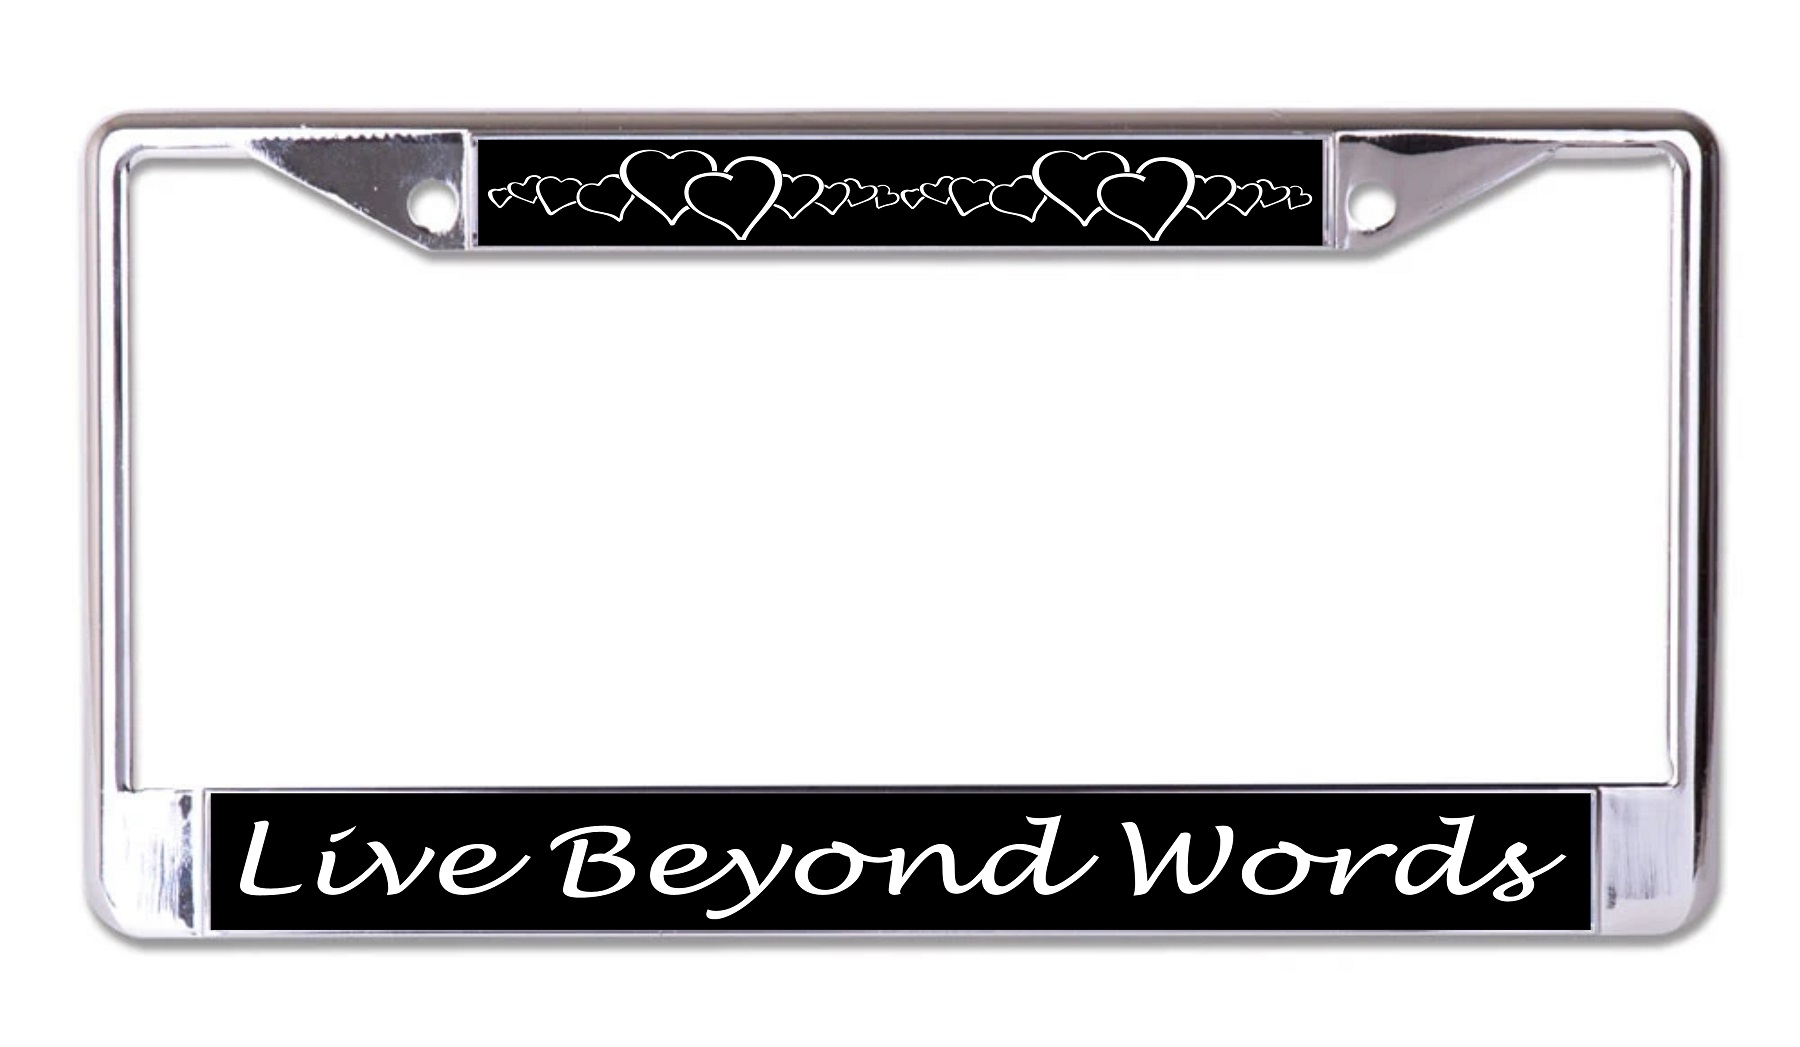 Live Beyond Words With Hearts Chrome LICENSE PLATE Frame